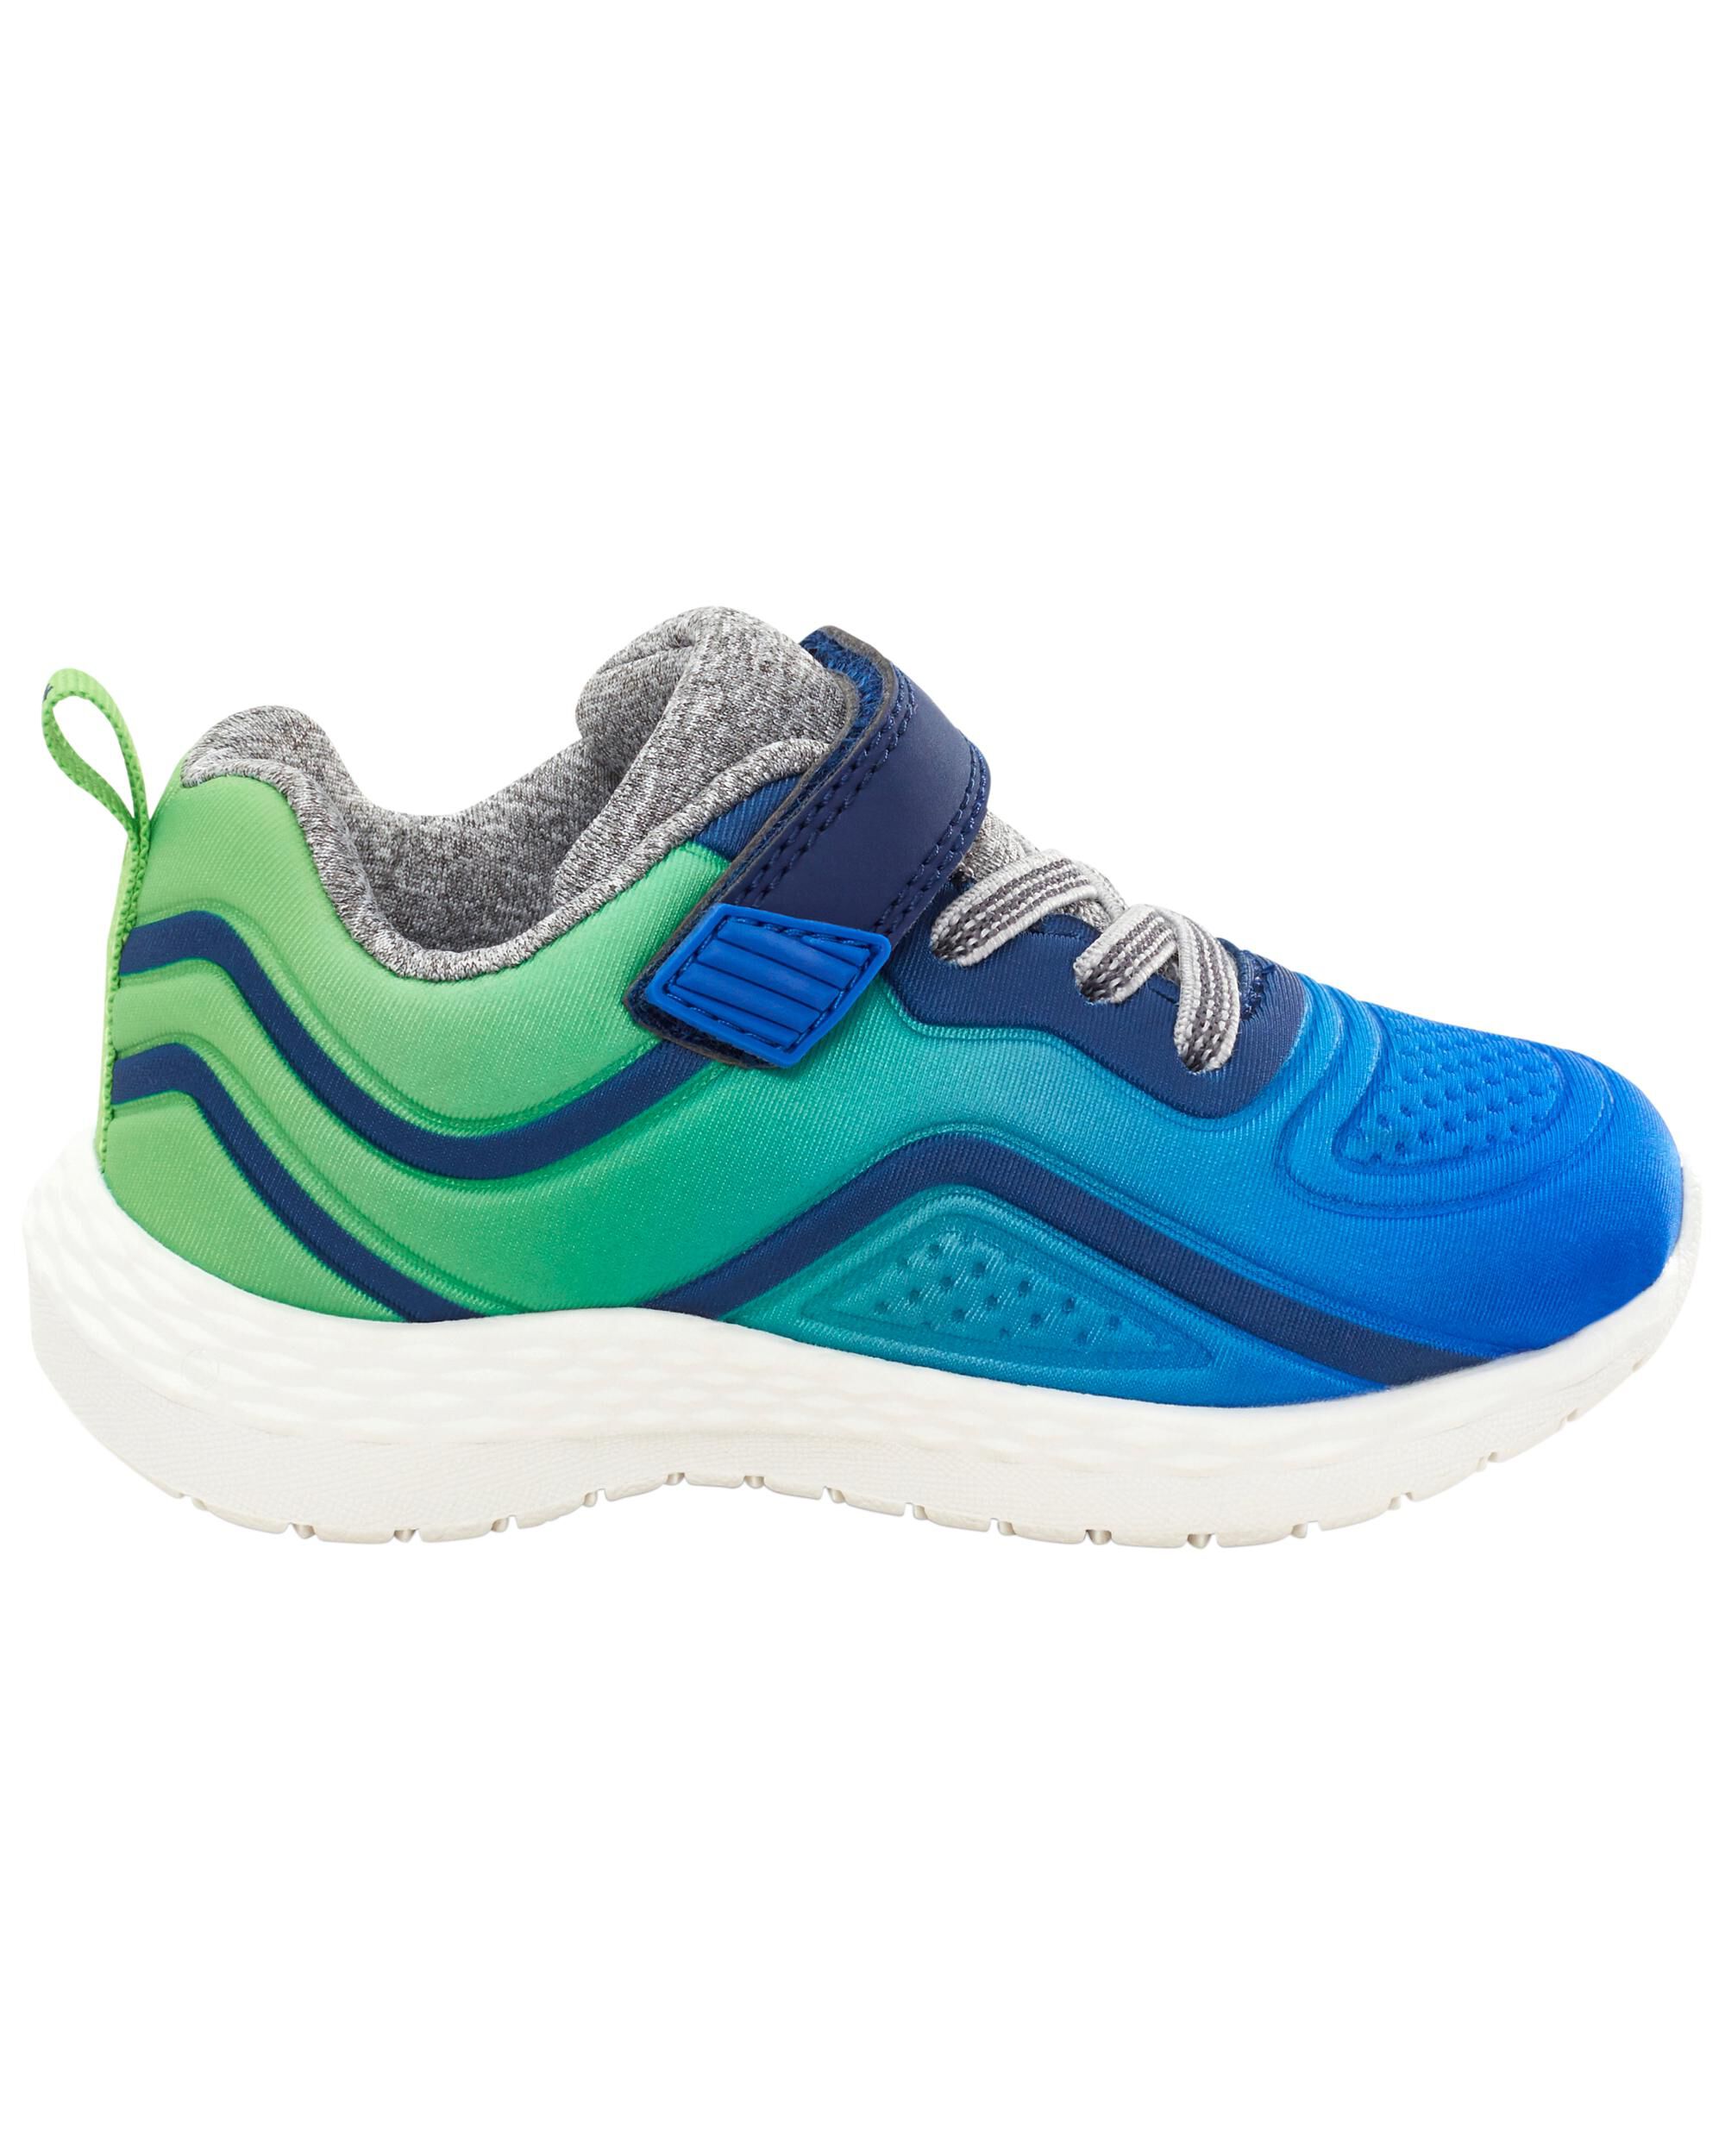 Blue/Green Toddler Carter's Athletic Sneakers | carters.com